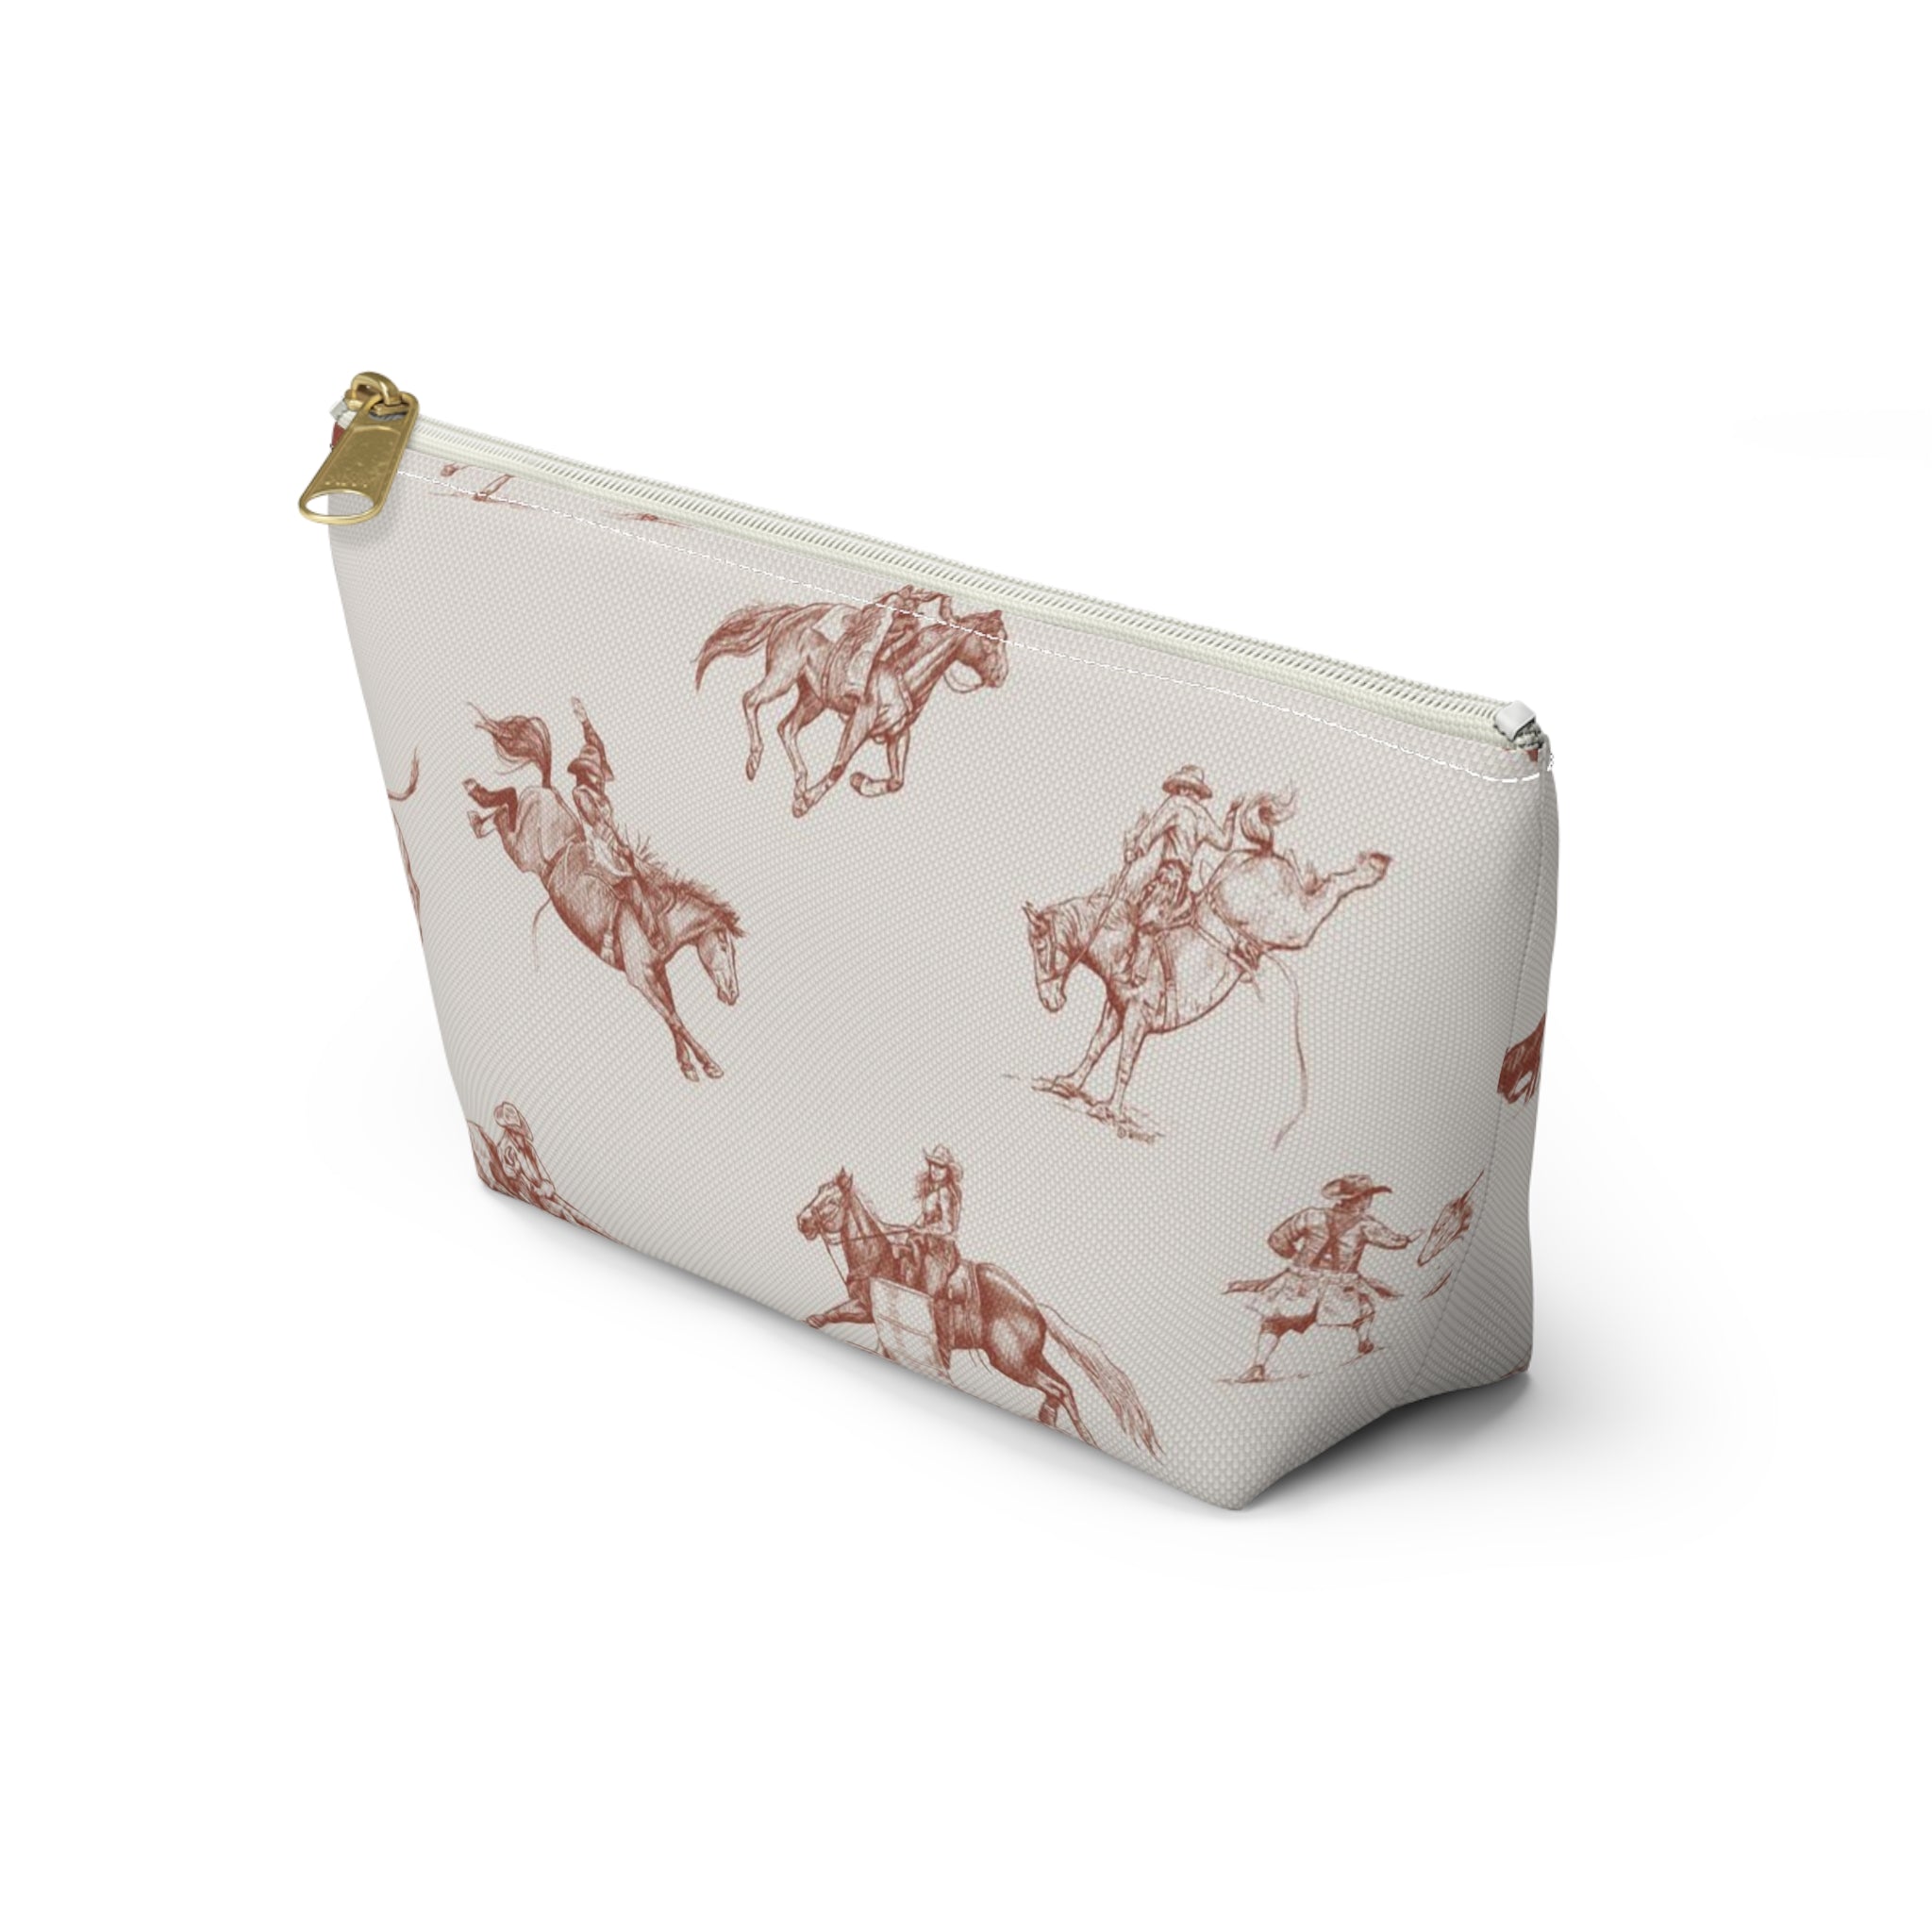 Take Me to the Rodeo Pencil Pouch in Cream